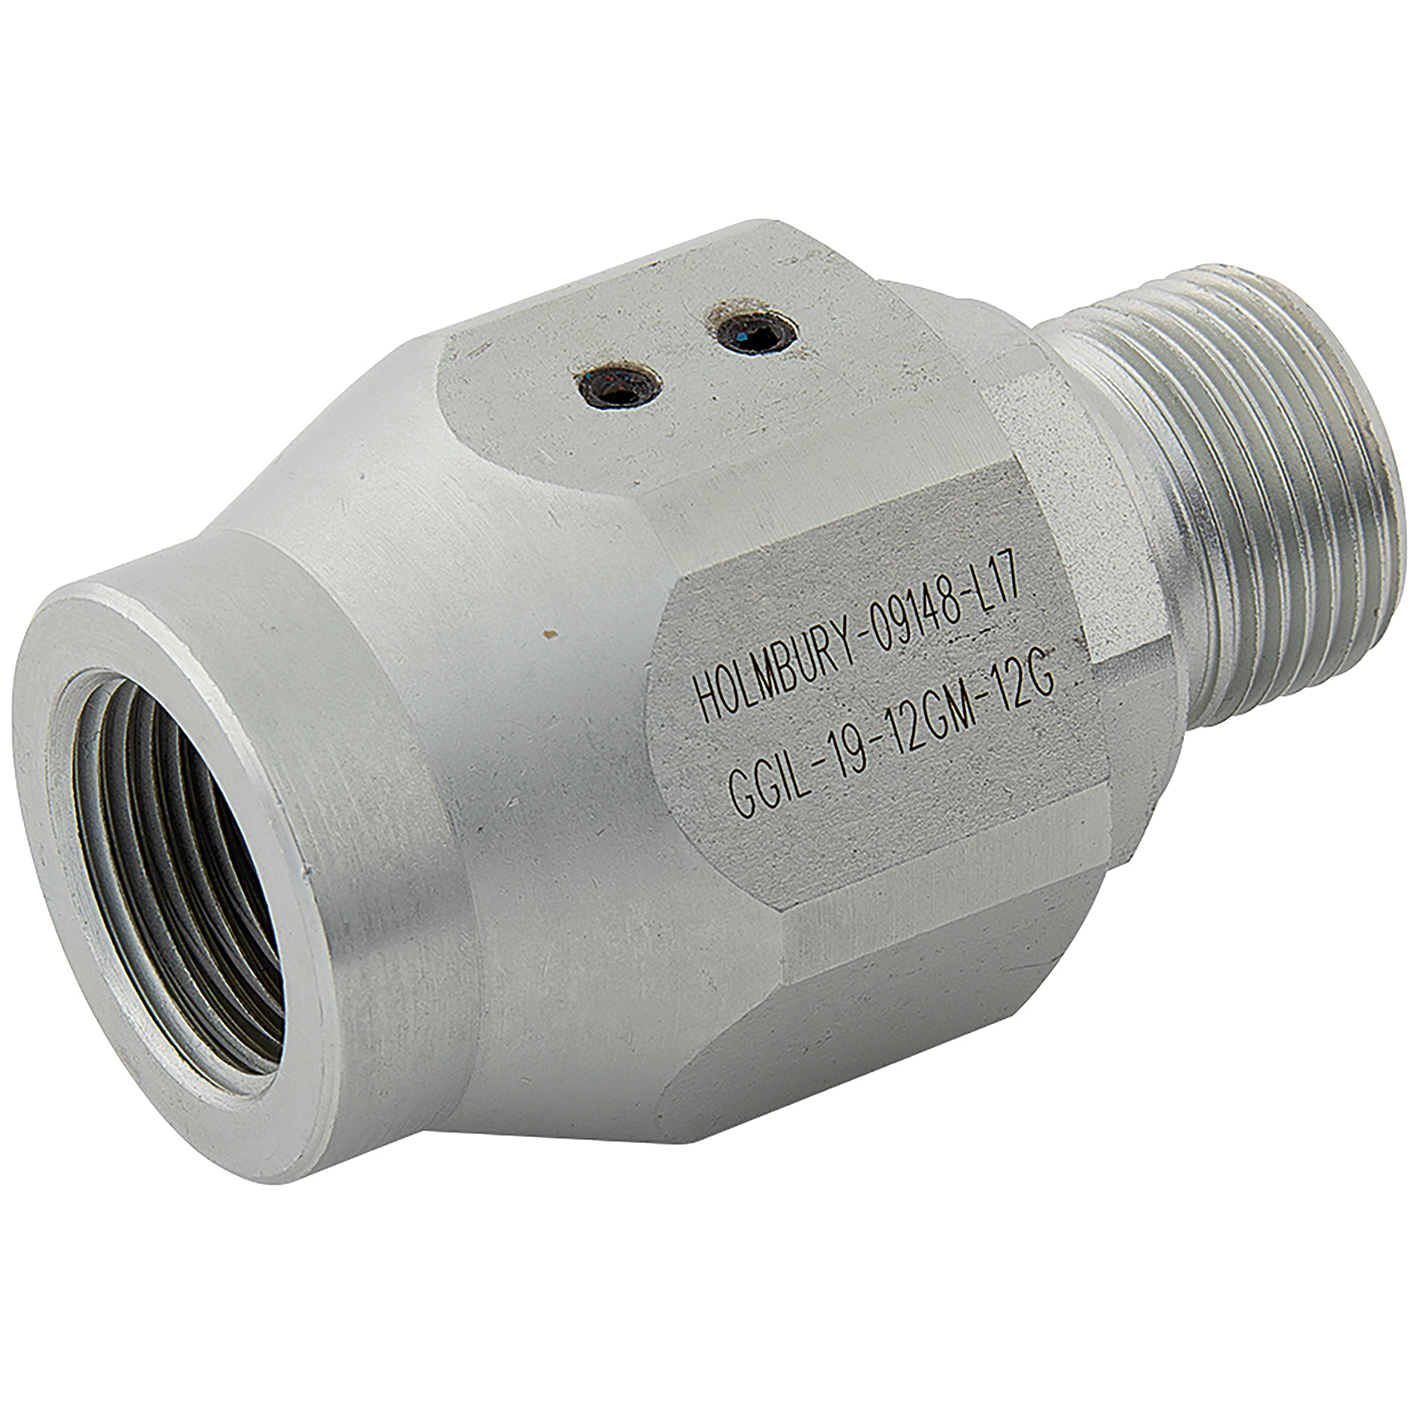 1/2" BSPP Rotary In-Line Coupling